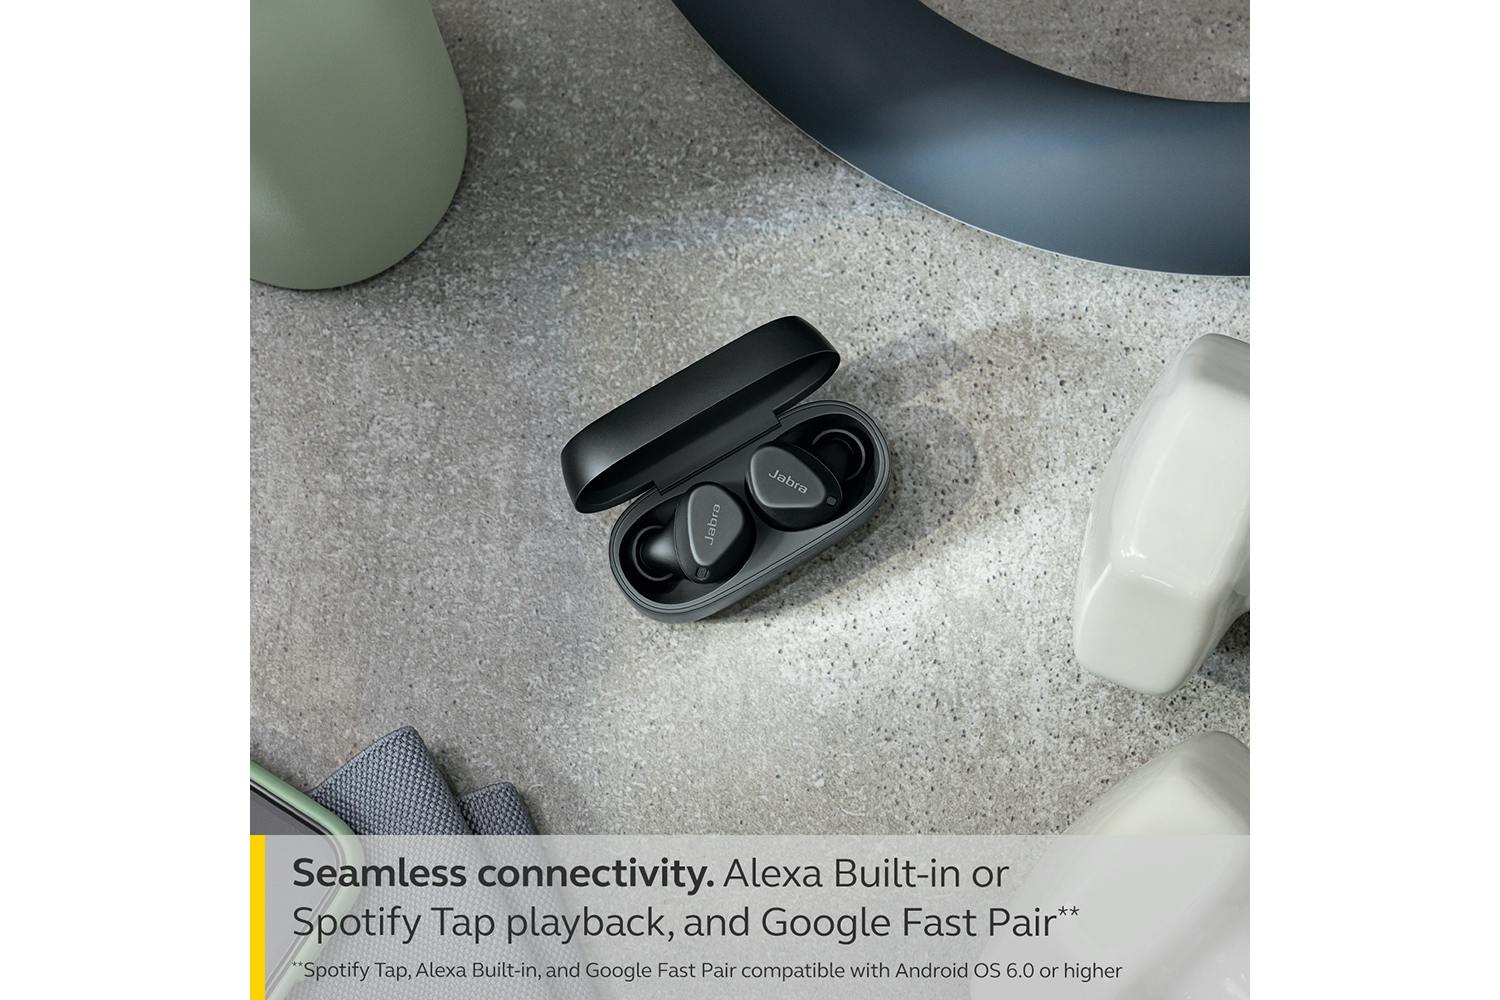 Jabra Elite 4 Active in Ear Bluetooth Earbuds Black - Incredible Connection